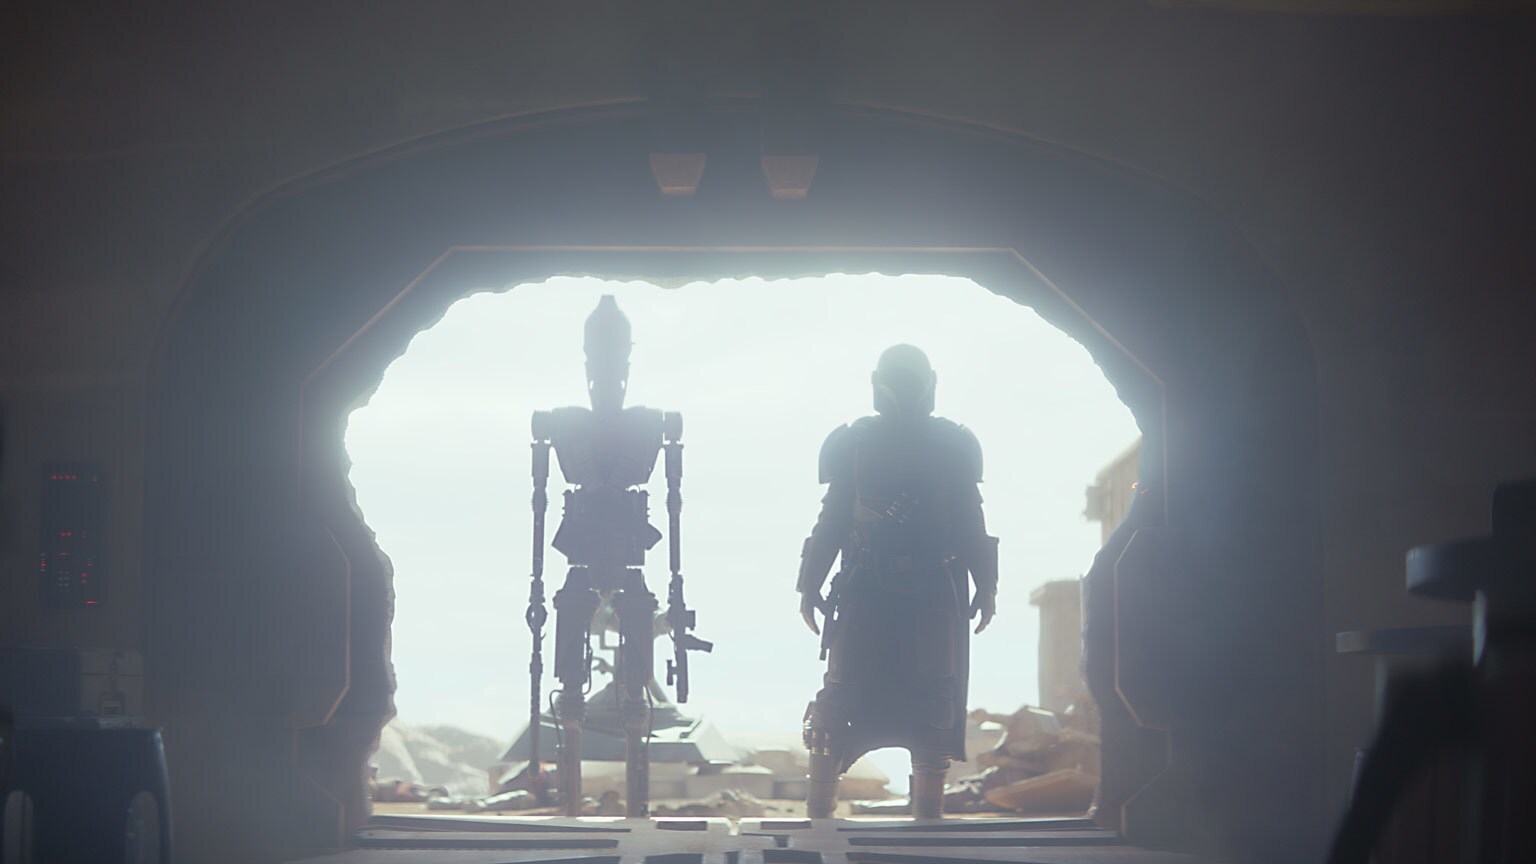 Poll: What Is Your Favorite Moment in the Mandalorian Trailer?